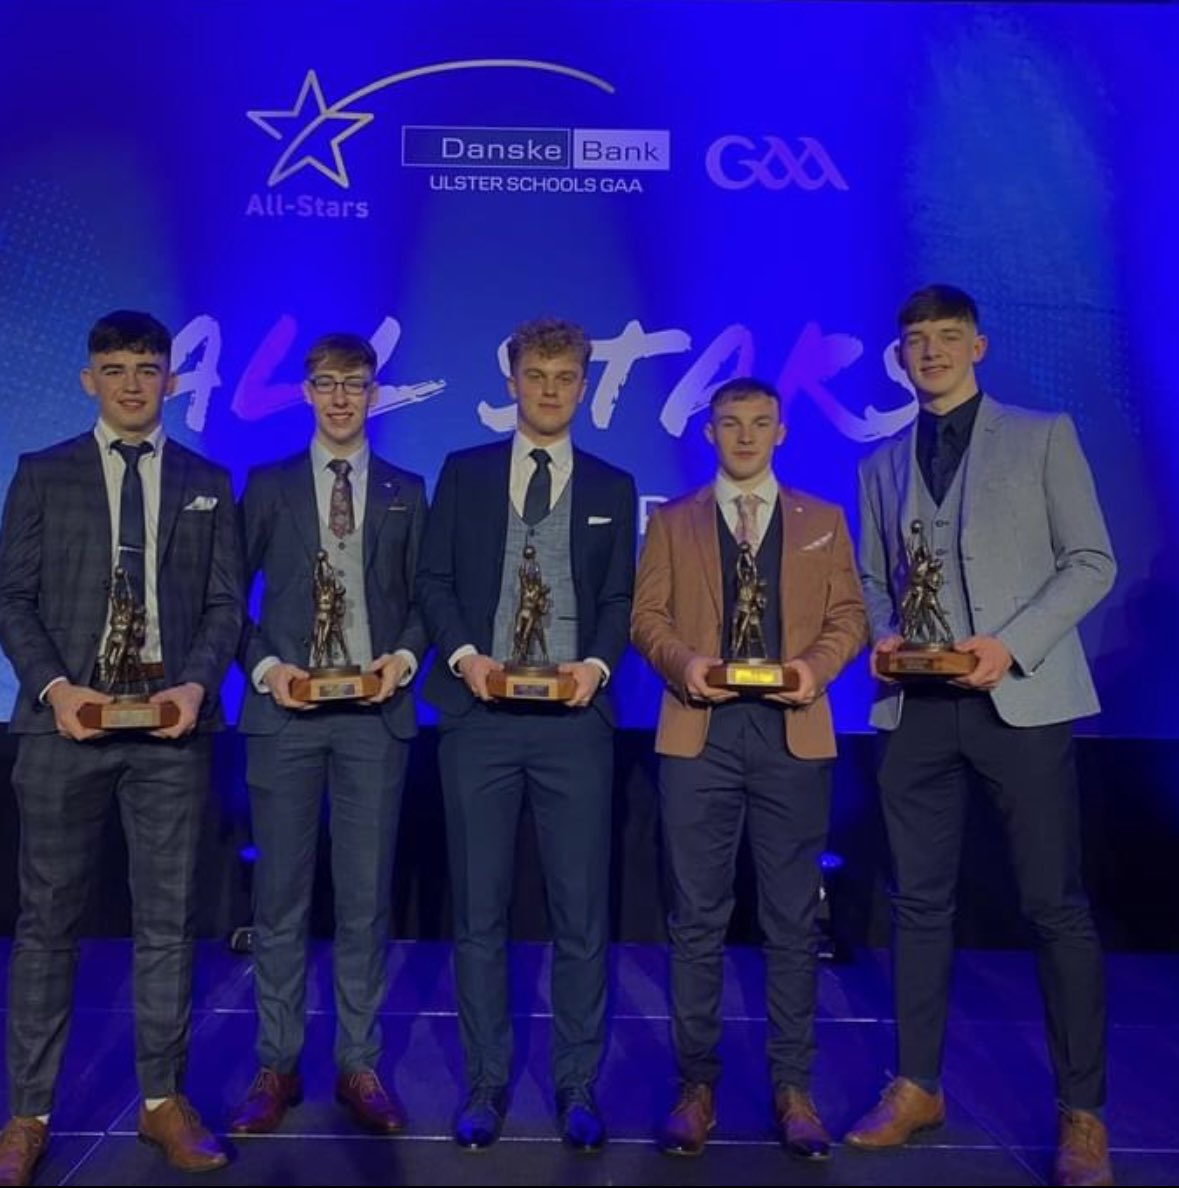 🏆Comhghairdeas mór to the 5 Monaghan recipients who received their @DanskeBank_UK @ulsterschools All Star awards on Friday night in Belfast. It was a fantastic achievement to have 5 players on the All-Star team!